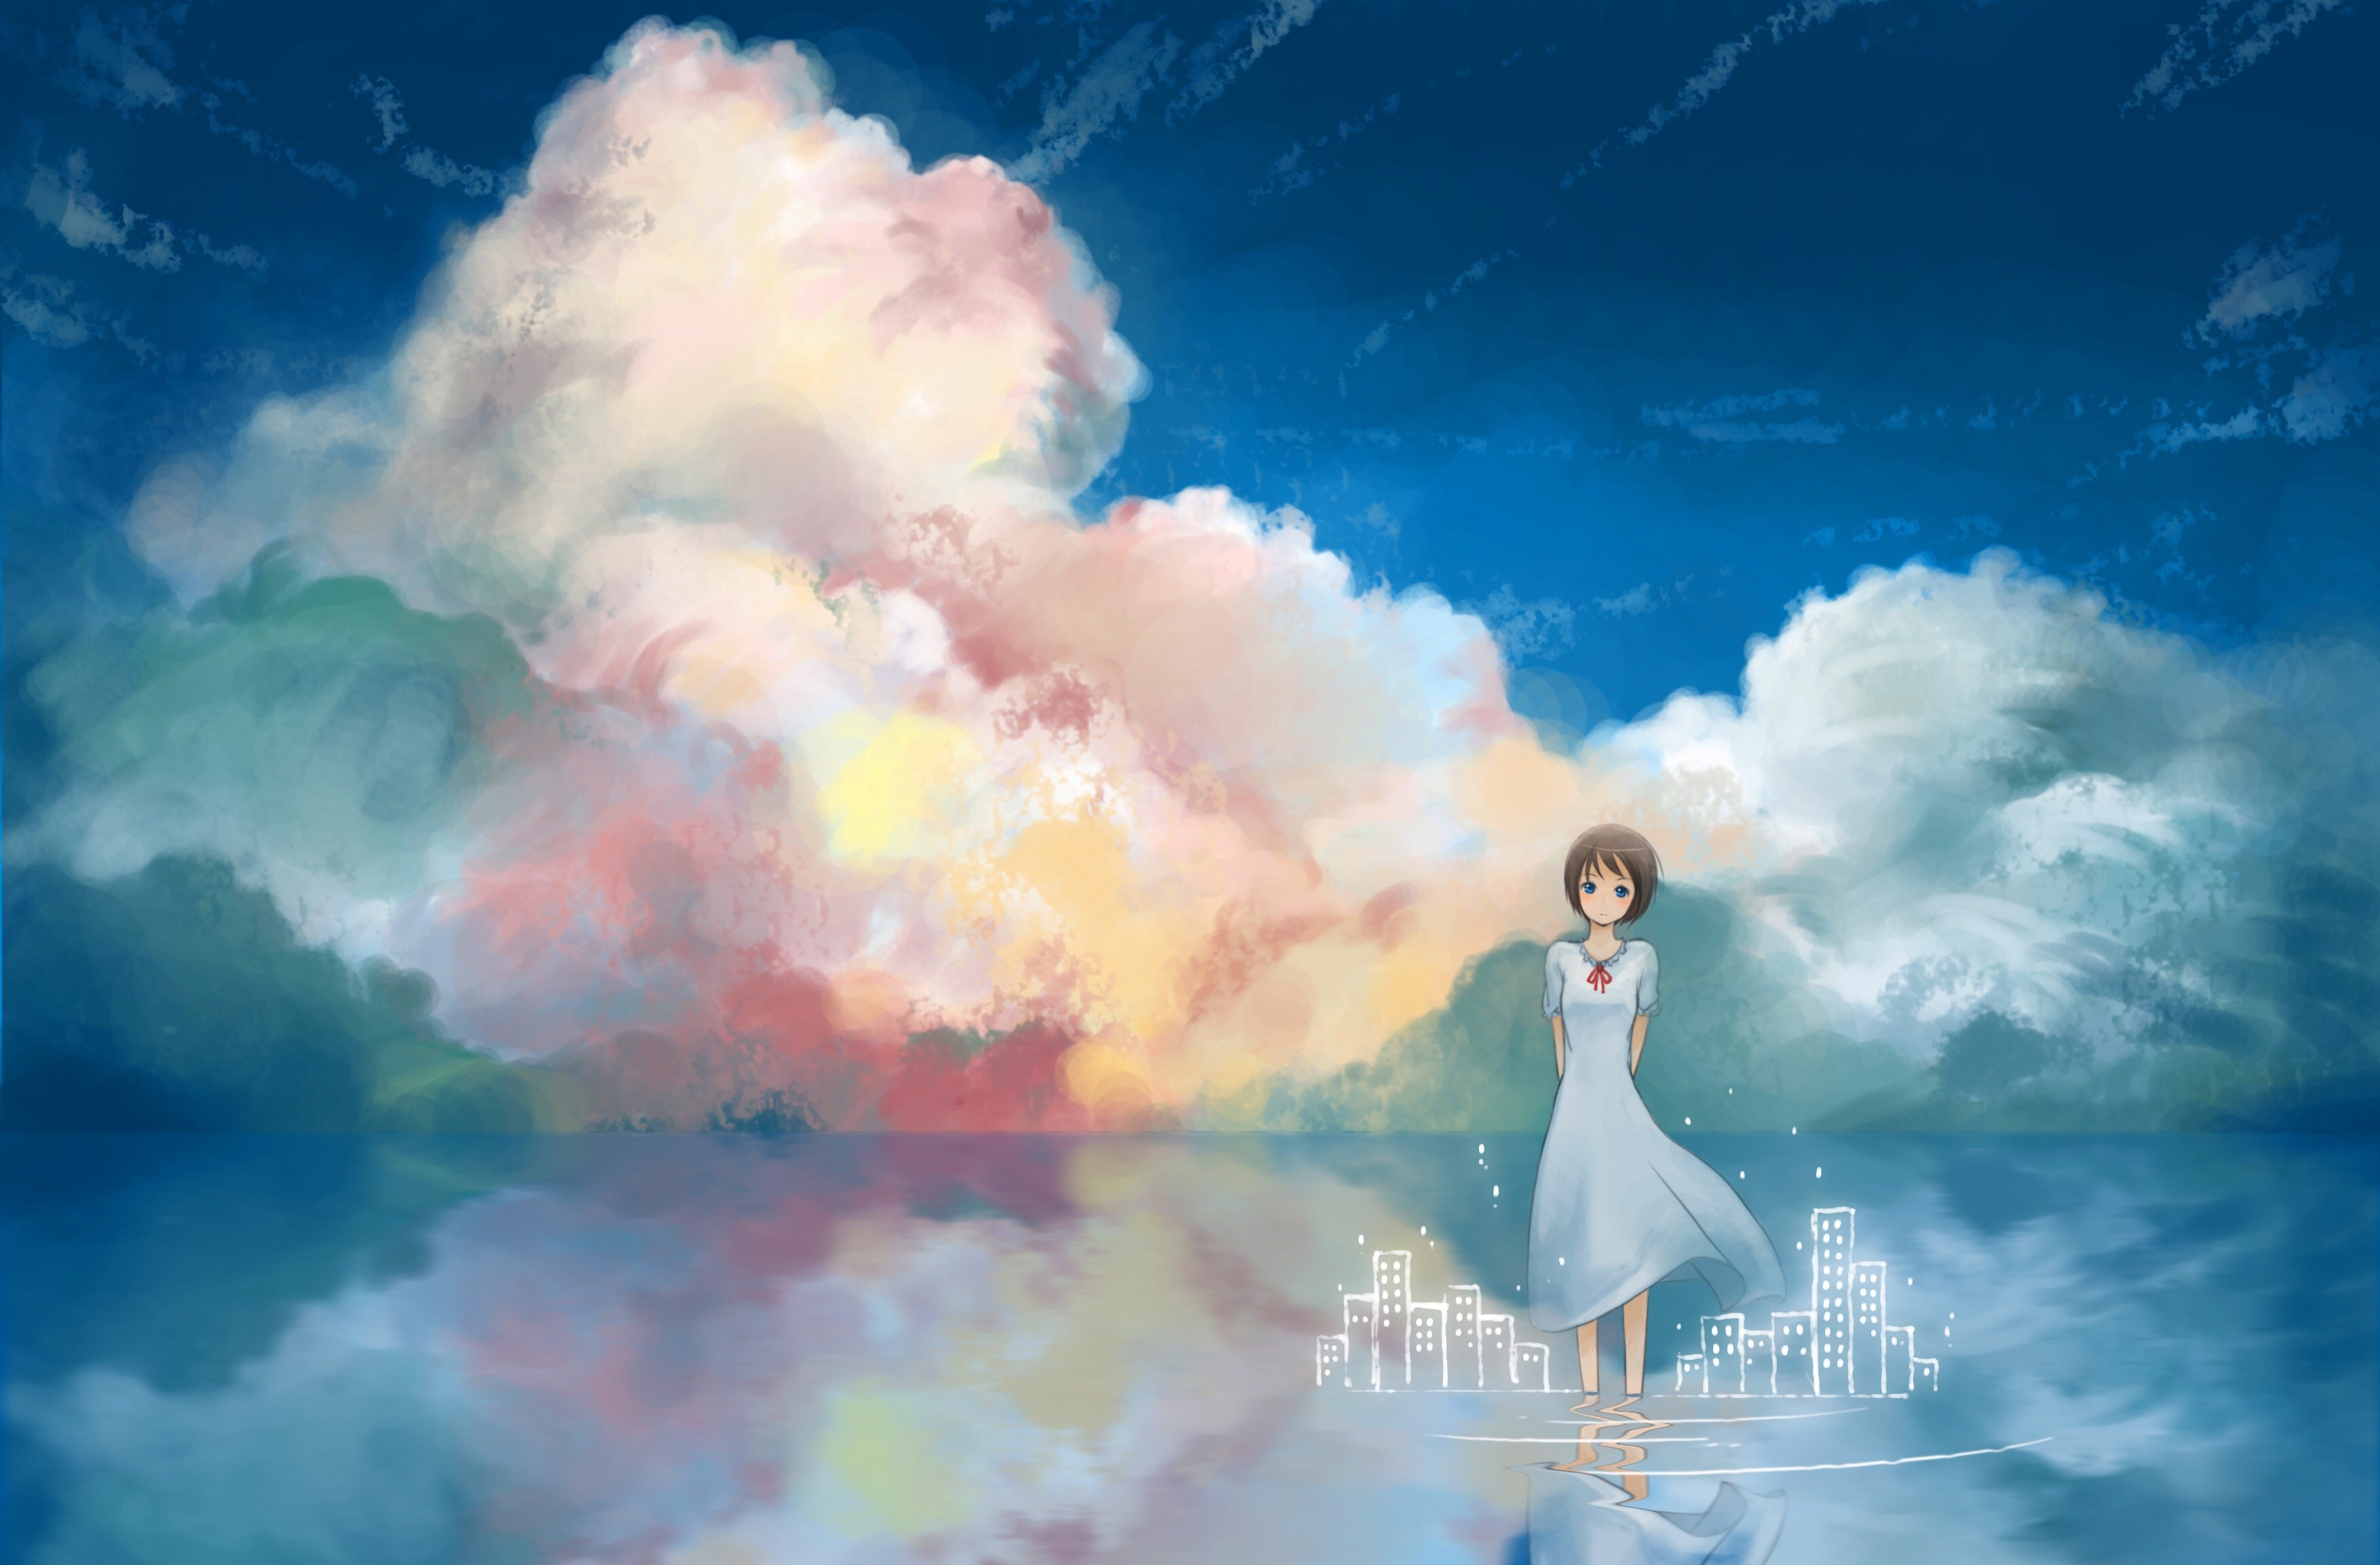 Anime 3508x2307 original characters landscape clouds anime anime girls sky dress brunette standing in water water